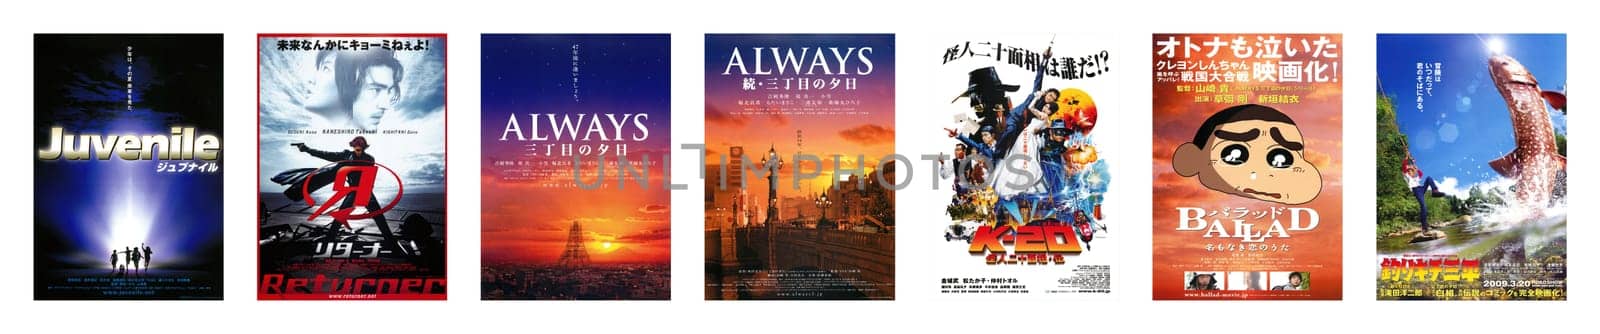 tokyo, japan - mar 10 2024: Leaflets used in Japanese cinemas as 1st teaser visual design tracing the filmography of Oscar-winning filmmaker Takashi Yamazaki between 2000 and 2009 (from left to right)